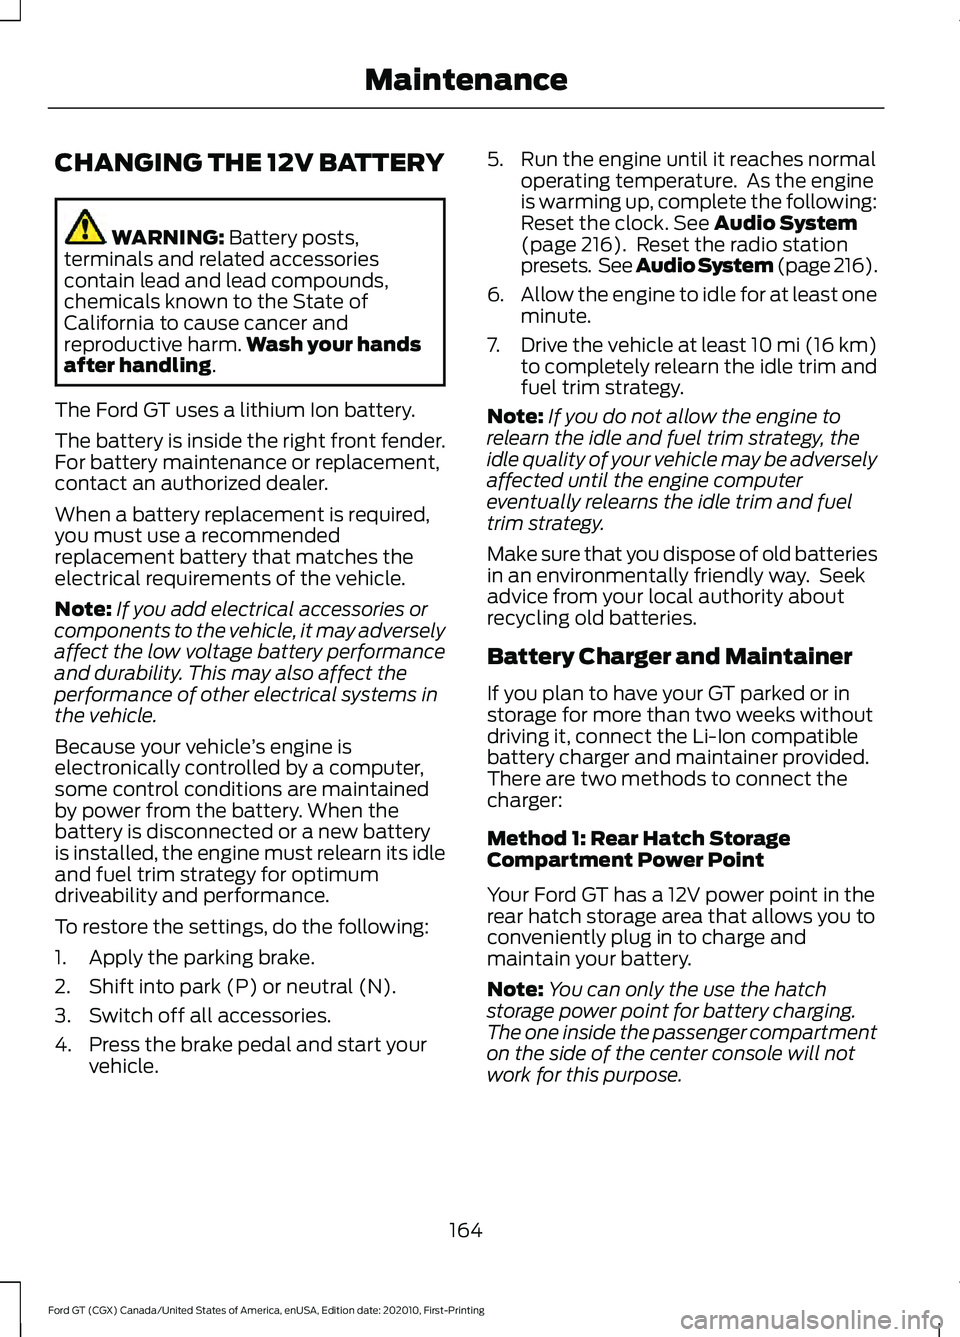 FORD GT 2021  Owners Manual CHANGING THE 12V BATTERY
WARNING: Battery posts,
terminals and related accessories
contain lead and lead compounds,
chemicals known to the State of
California to cause cancer and
reproductive harm. Wa